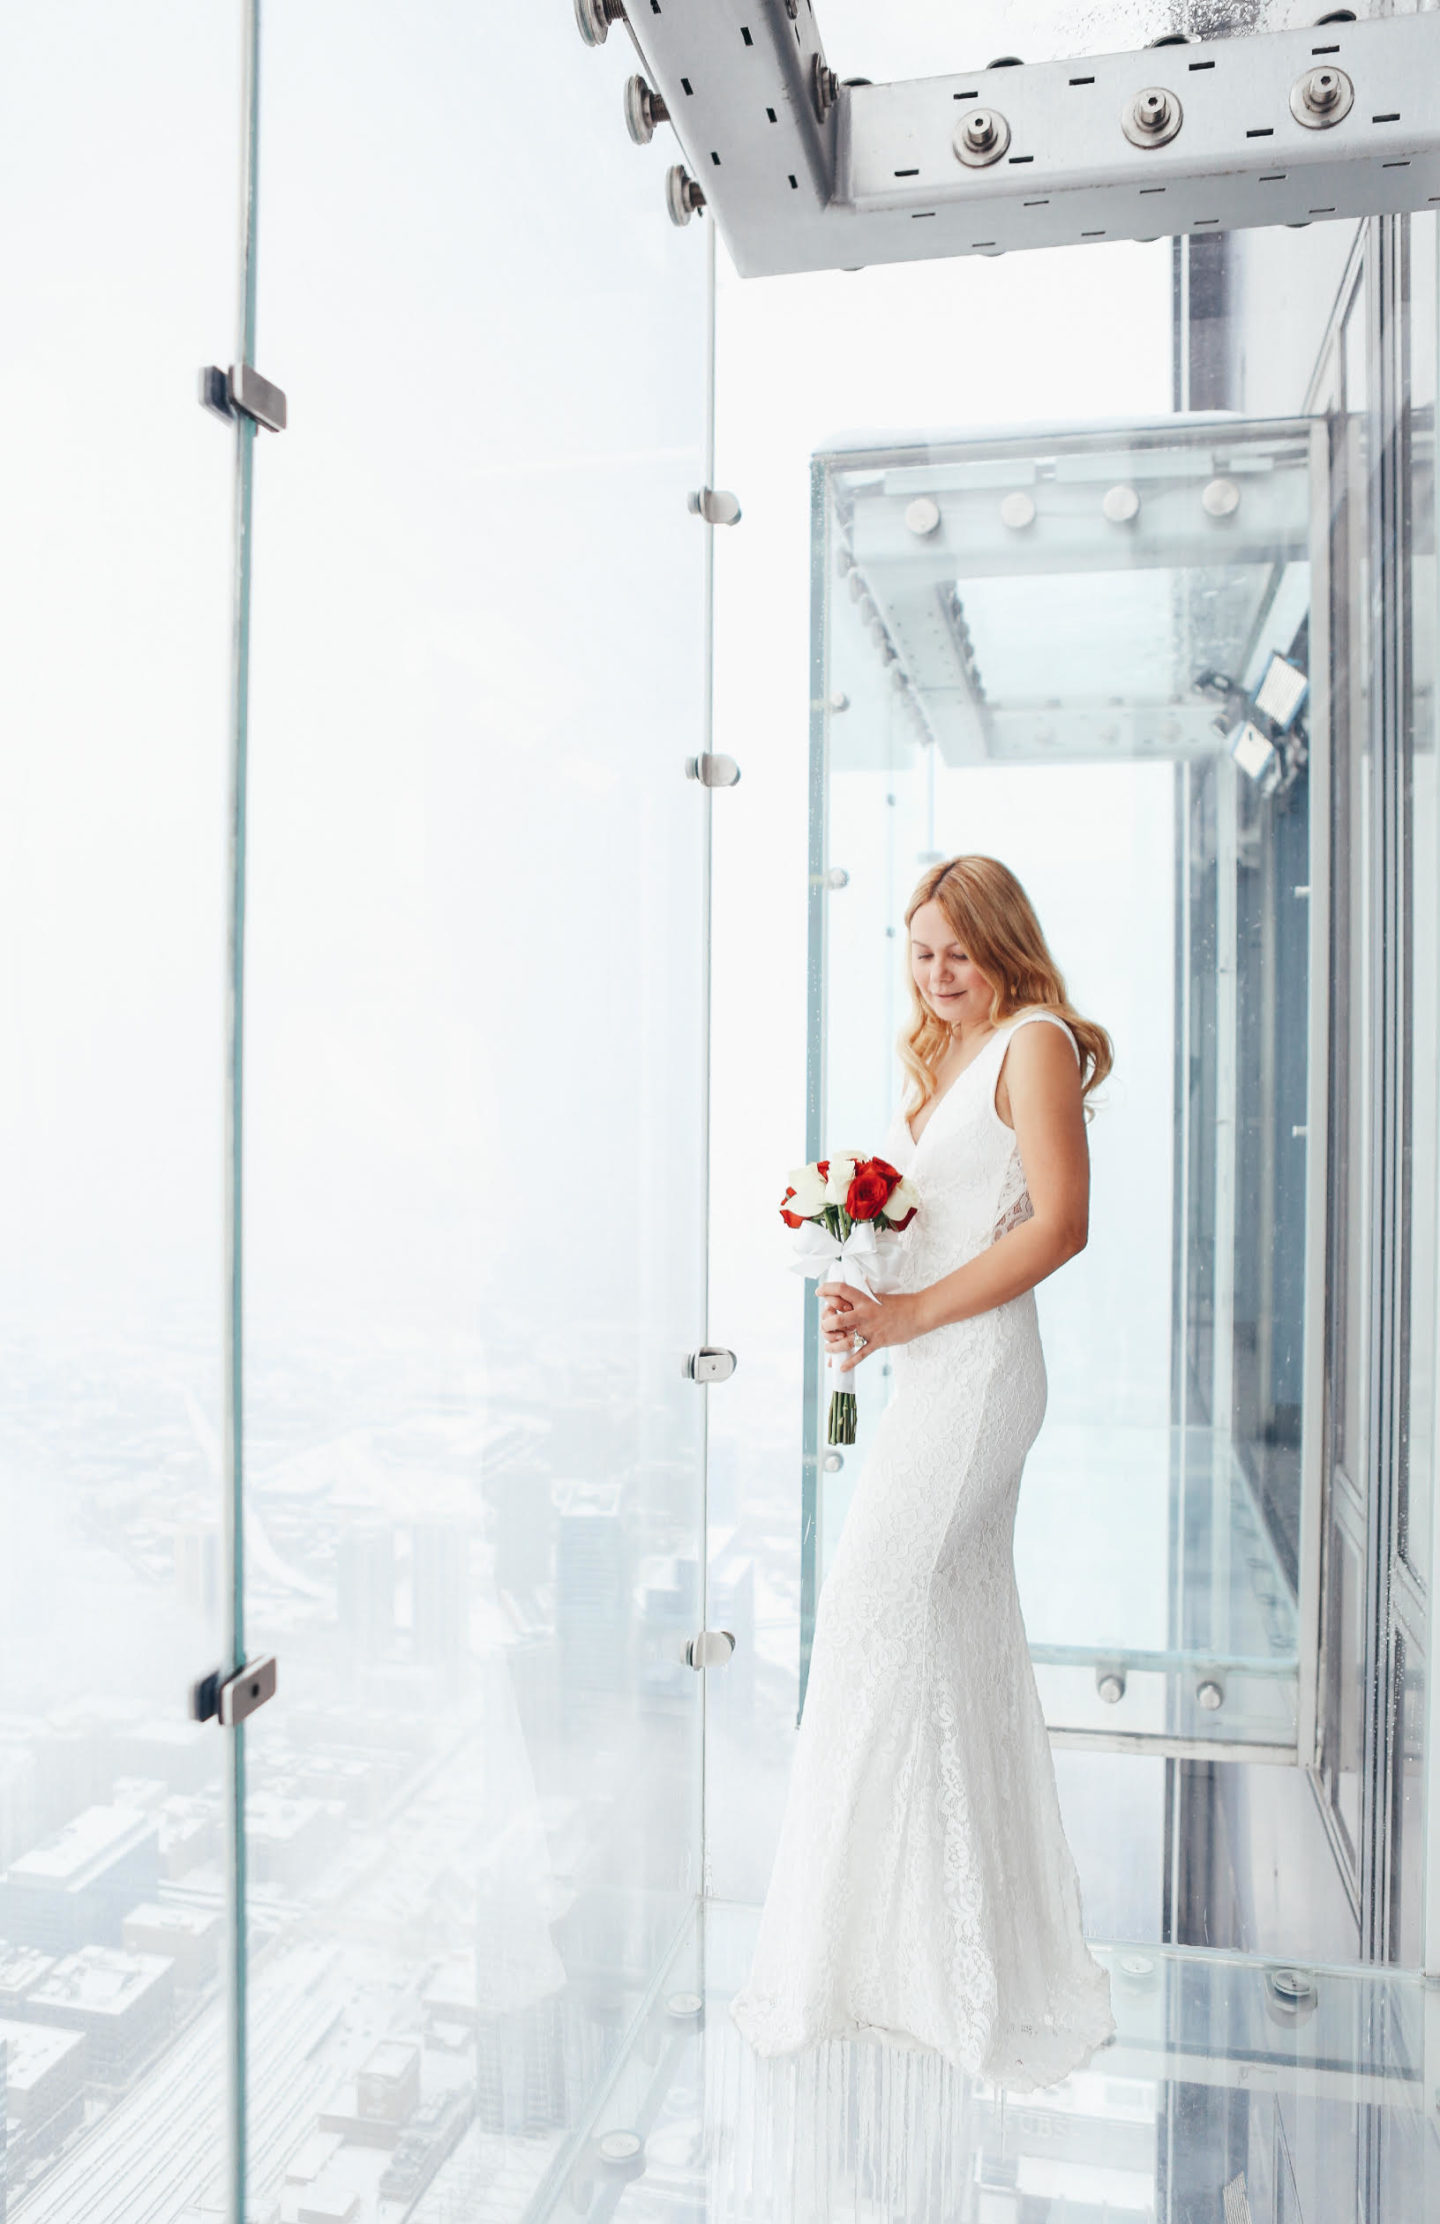 White-lace-wedding-dress-Vanessa-Lambert-Skydeck-Chicago-What-Would-V-Wear